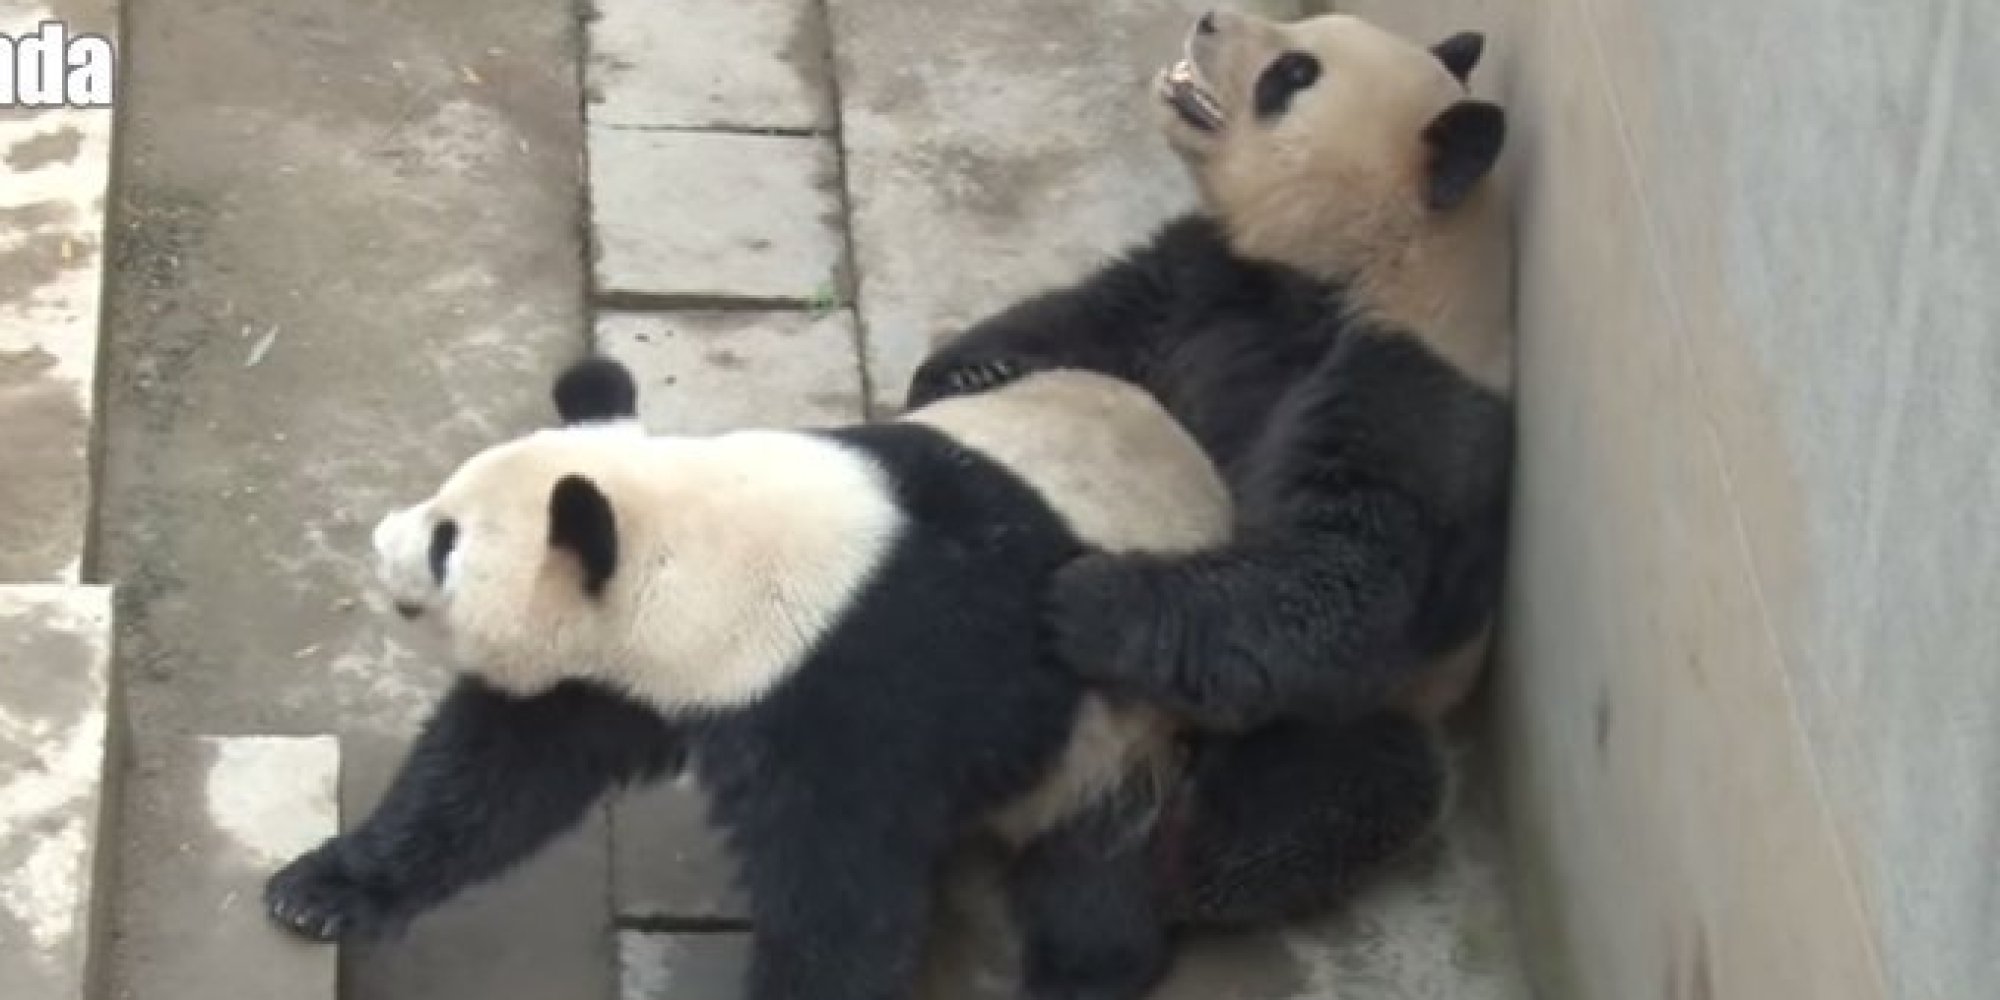 Chinas Sexiest Panda Obliterates Own Record In Latest Sex Romp Huffpost 1638